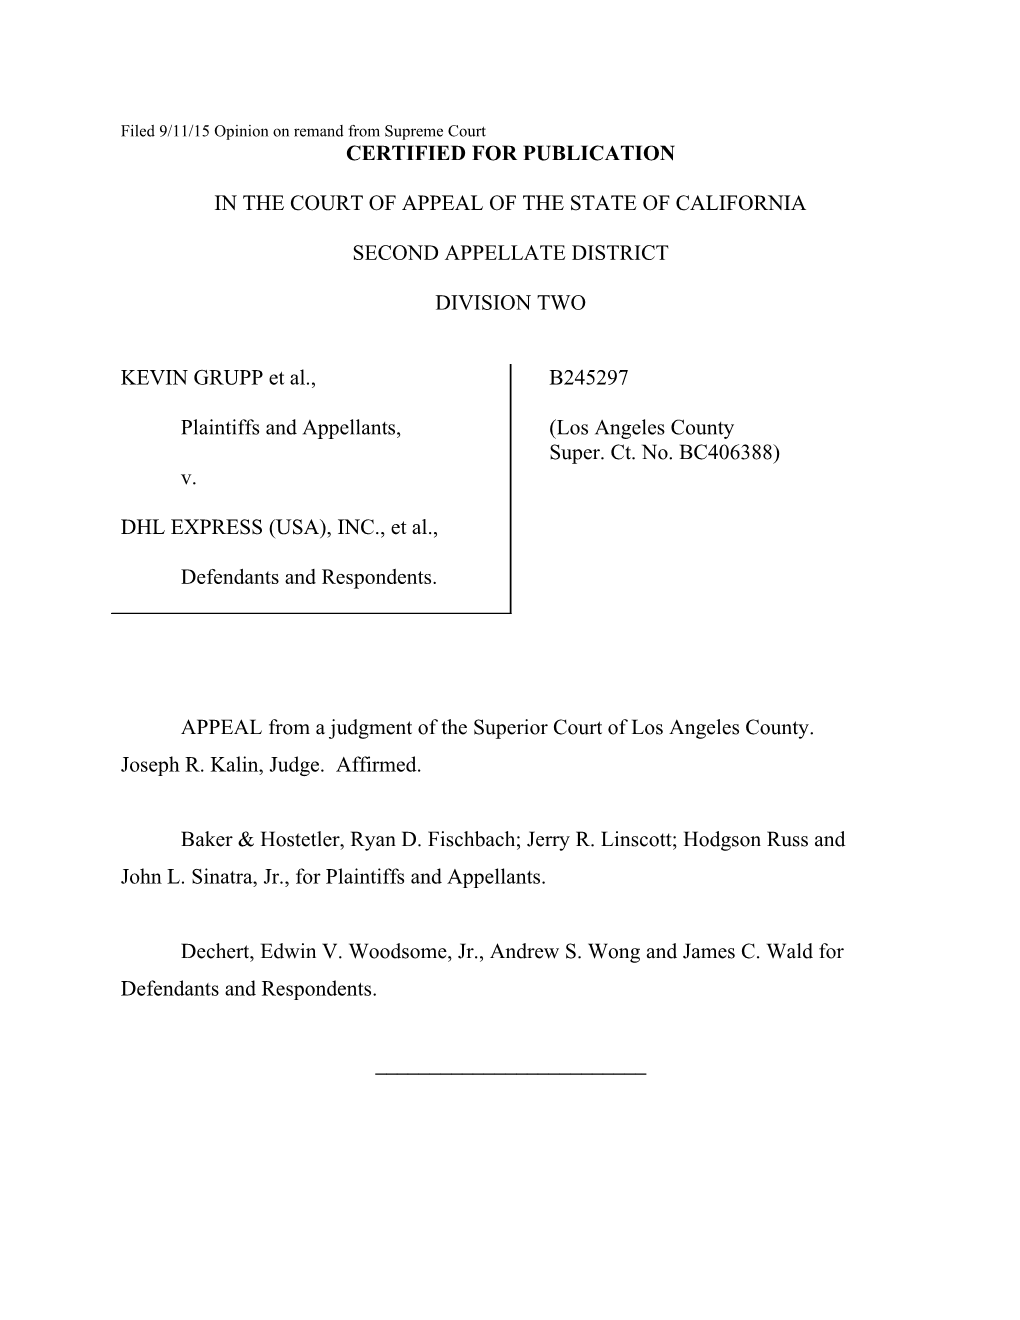 Filed 9/11/15 Opinion on Remand from Supreme Court